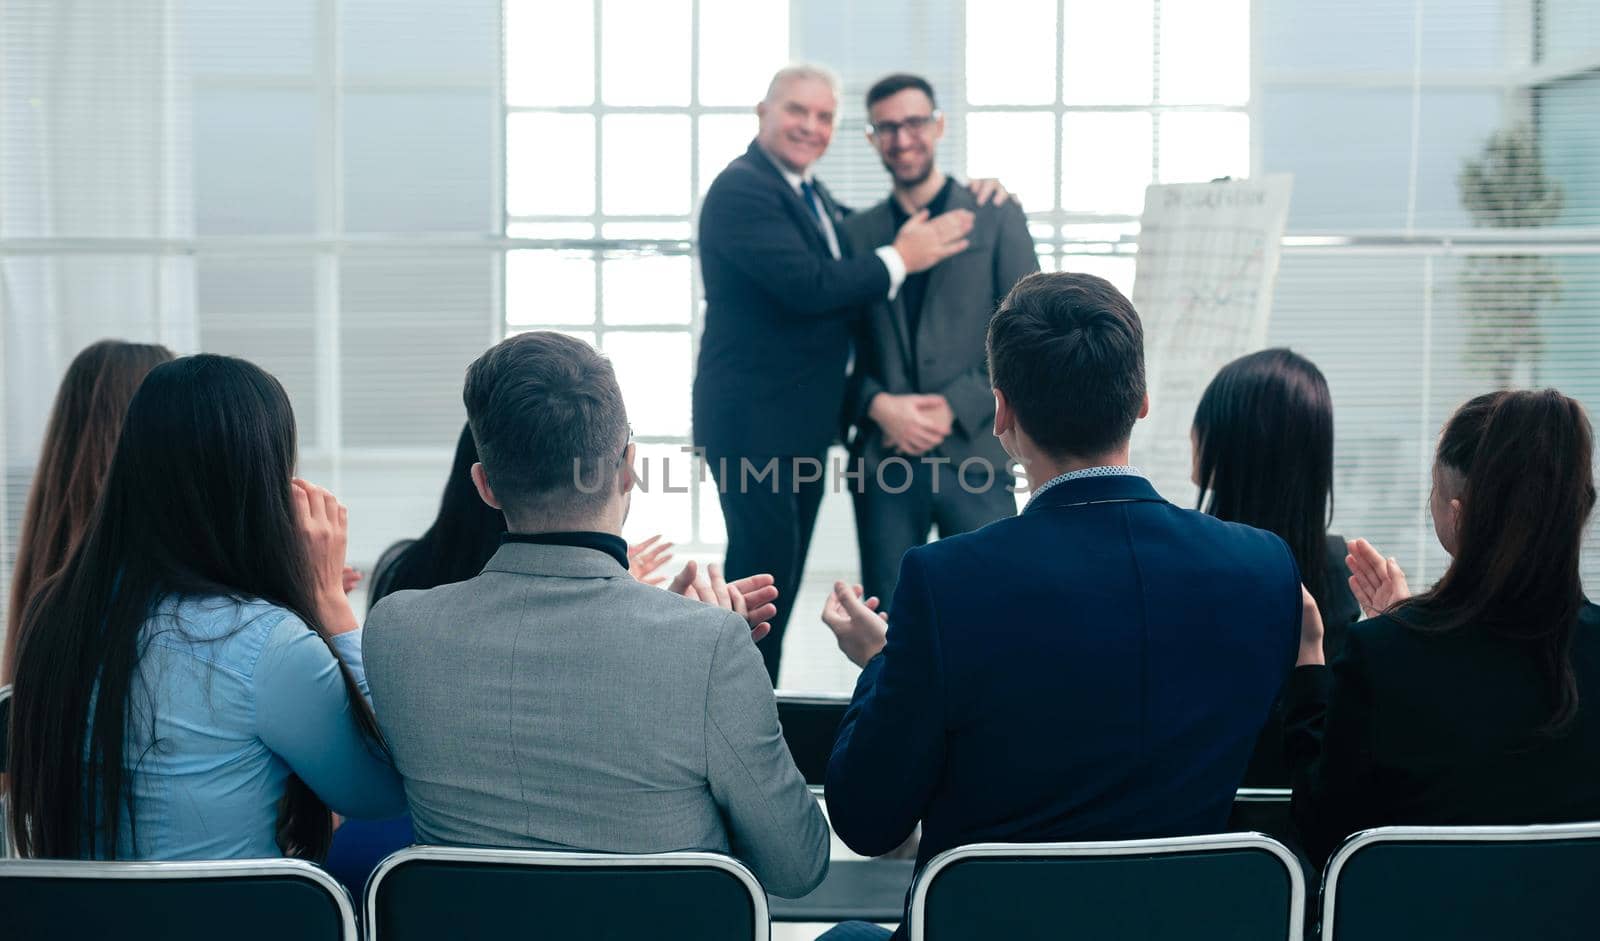 business partners standing together in a conference room during a business meeting.